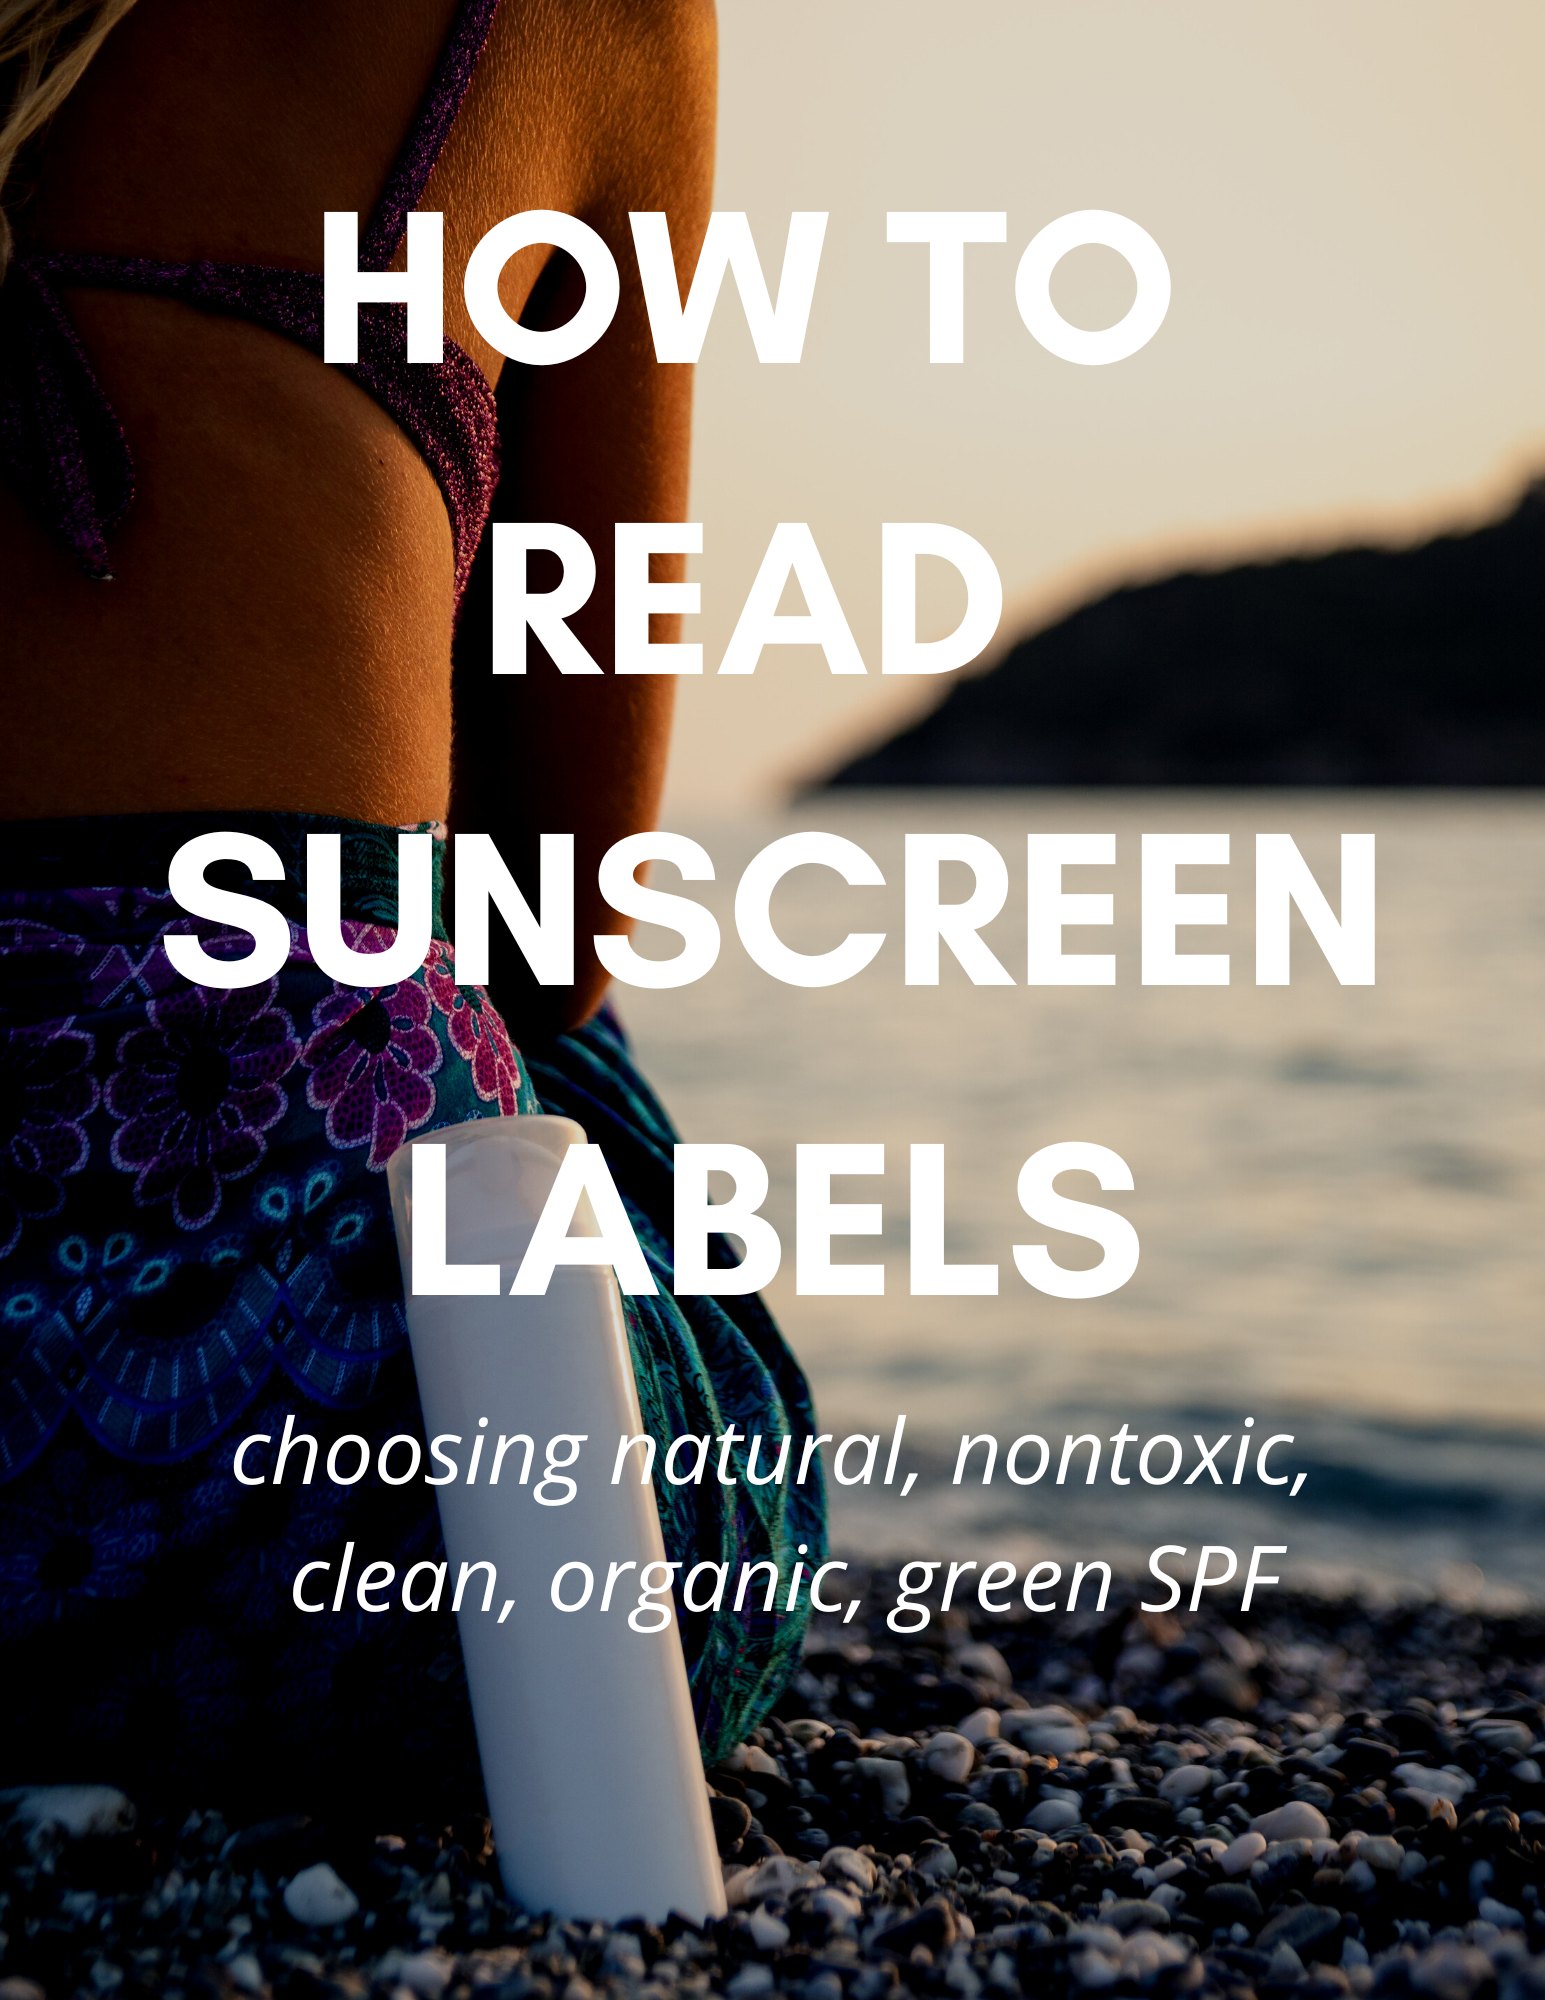 how to read sunscreen labels graphic